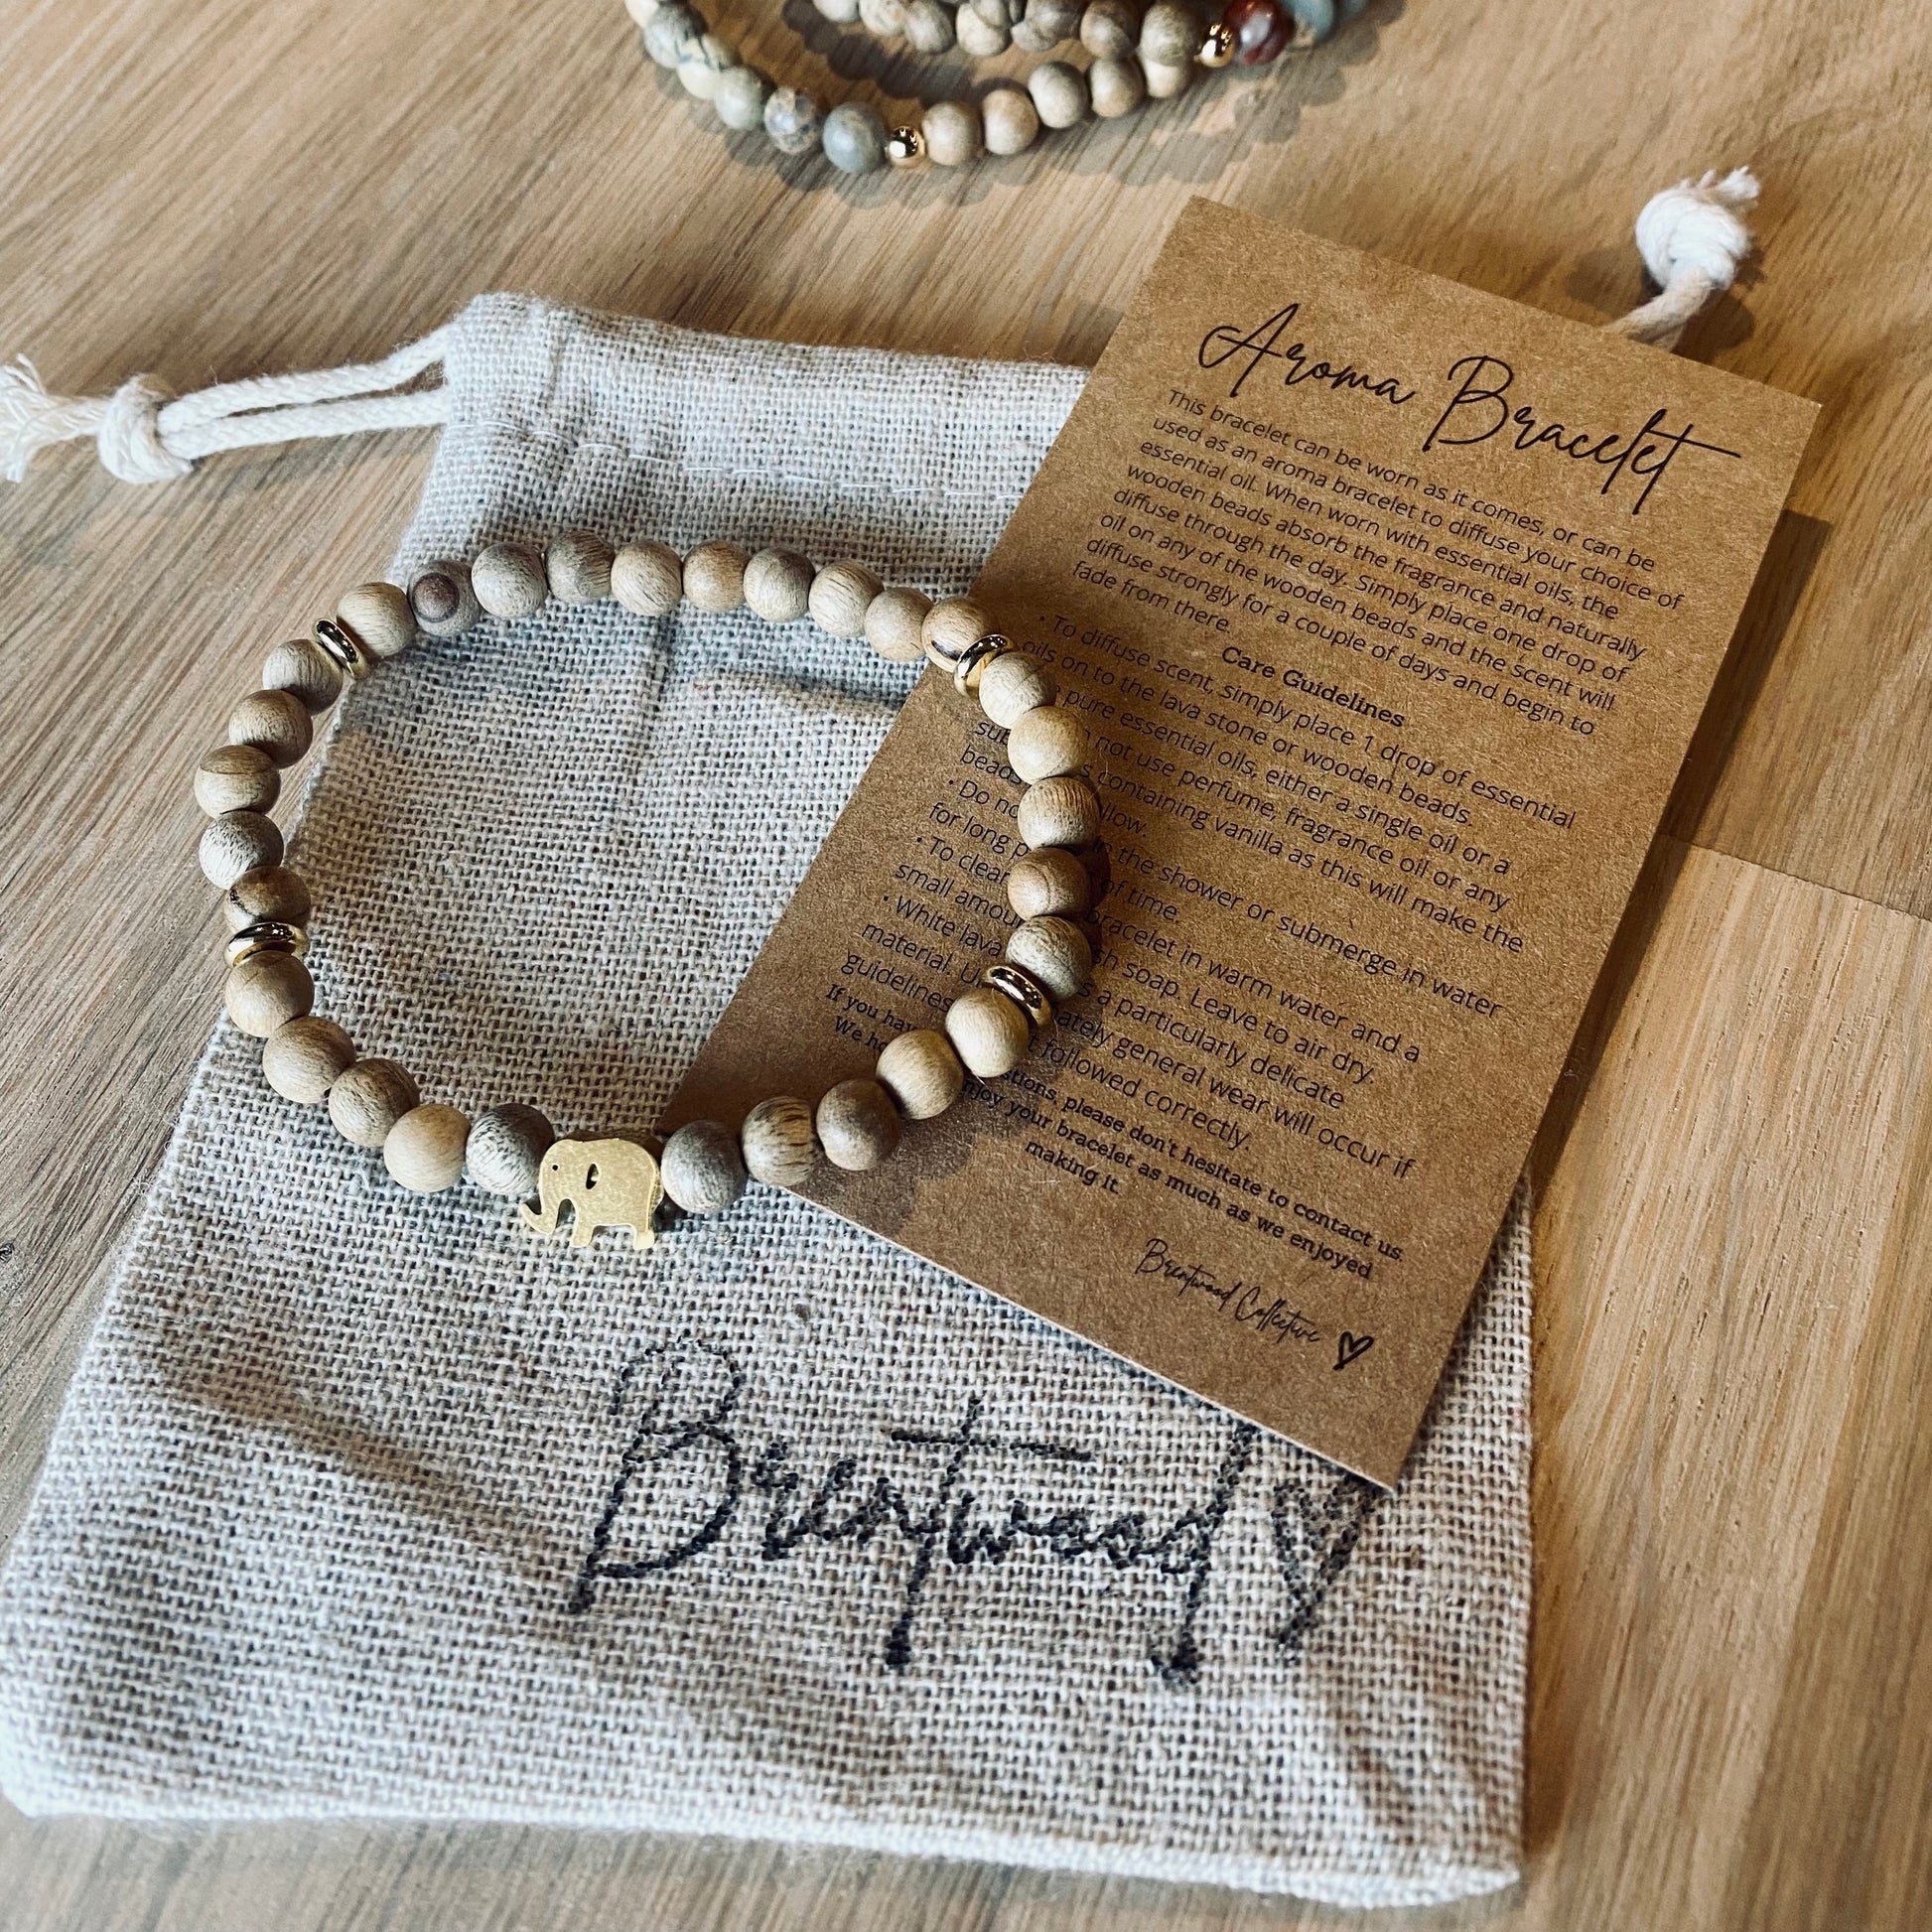 Gold Elephant aroma bracelet/diffuser bracelet made from 6mm burly wood beads beads with gold lucky elephant charm and gold disc embellishments.  Laid on cloth pouch/drawstring bag stamped with “Brentwood” and an aroma bracelet information and care card on kraft brown card.